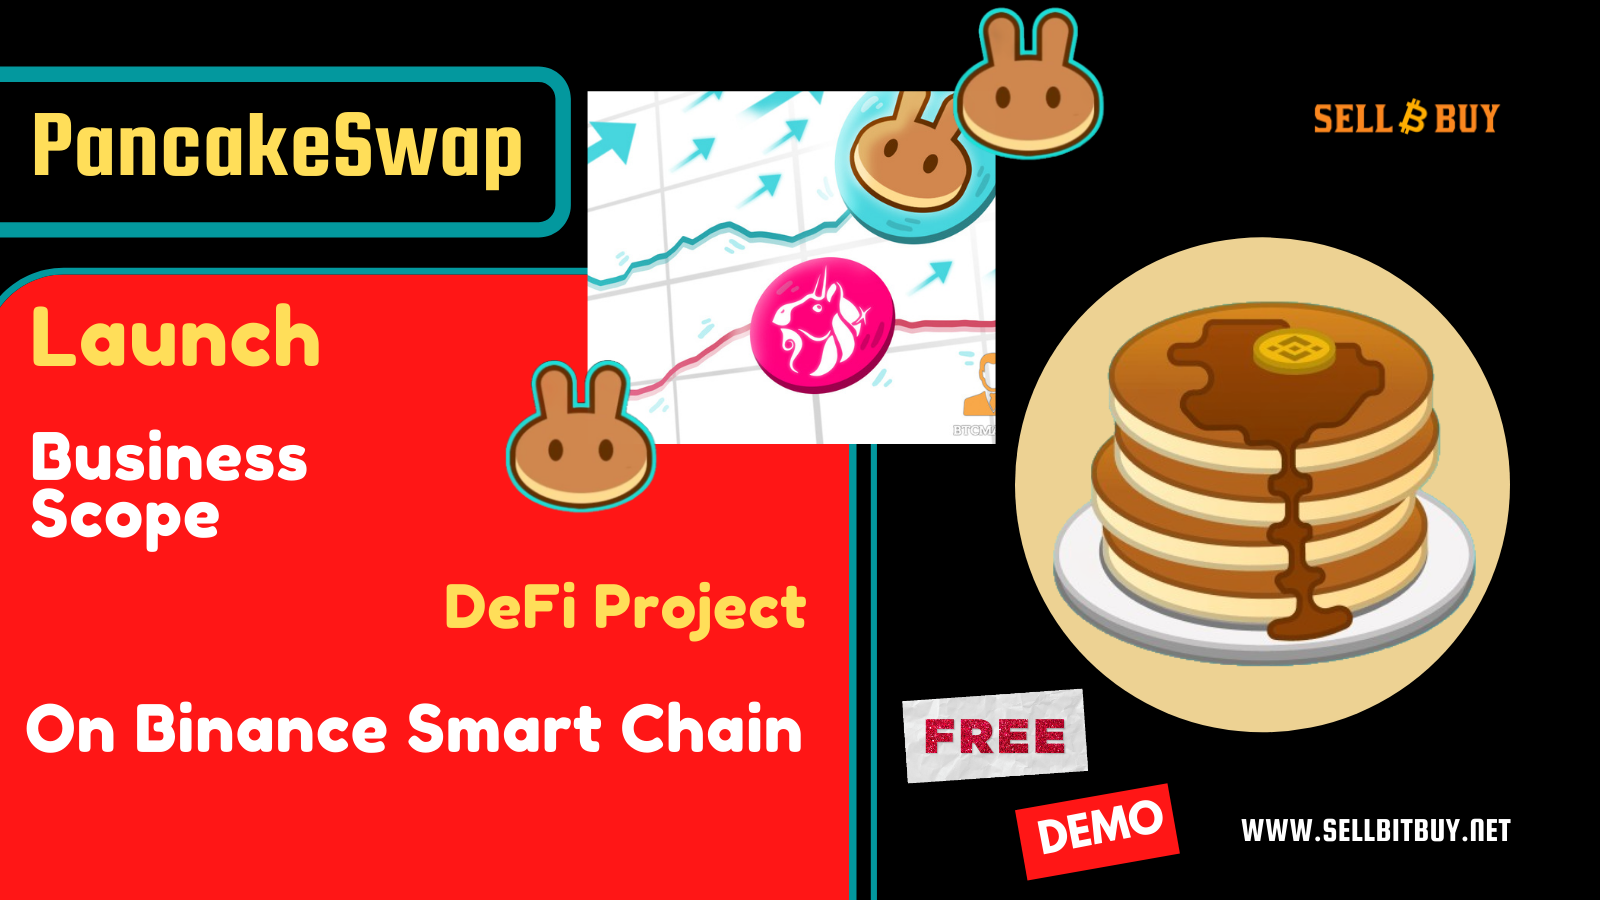 Article about PancakeSwap - High ROI Providing DeFi Project Startup Ideas